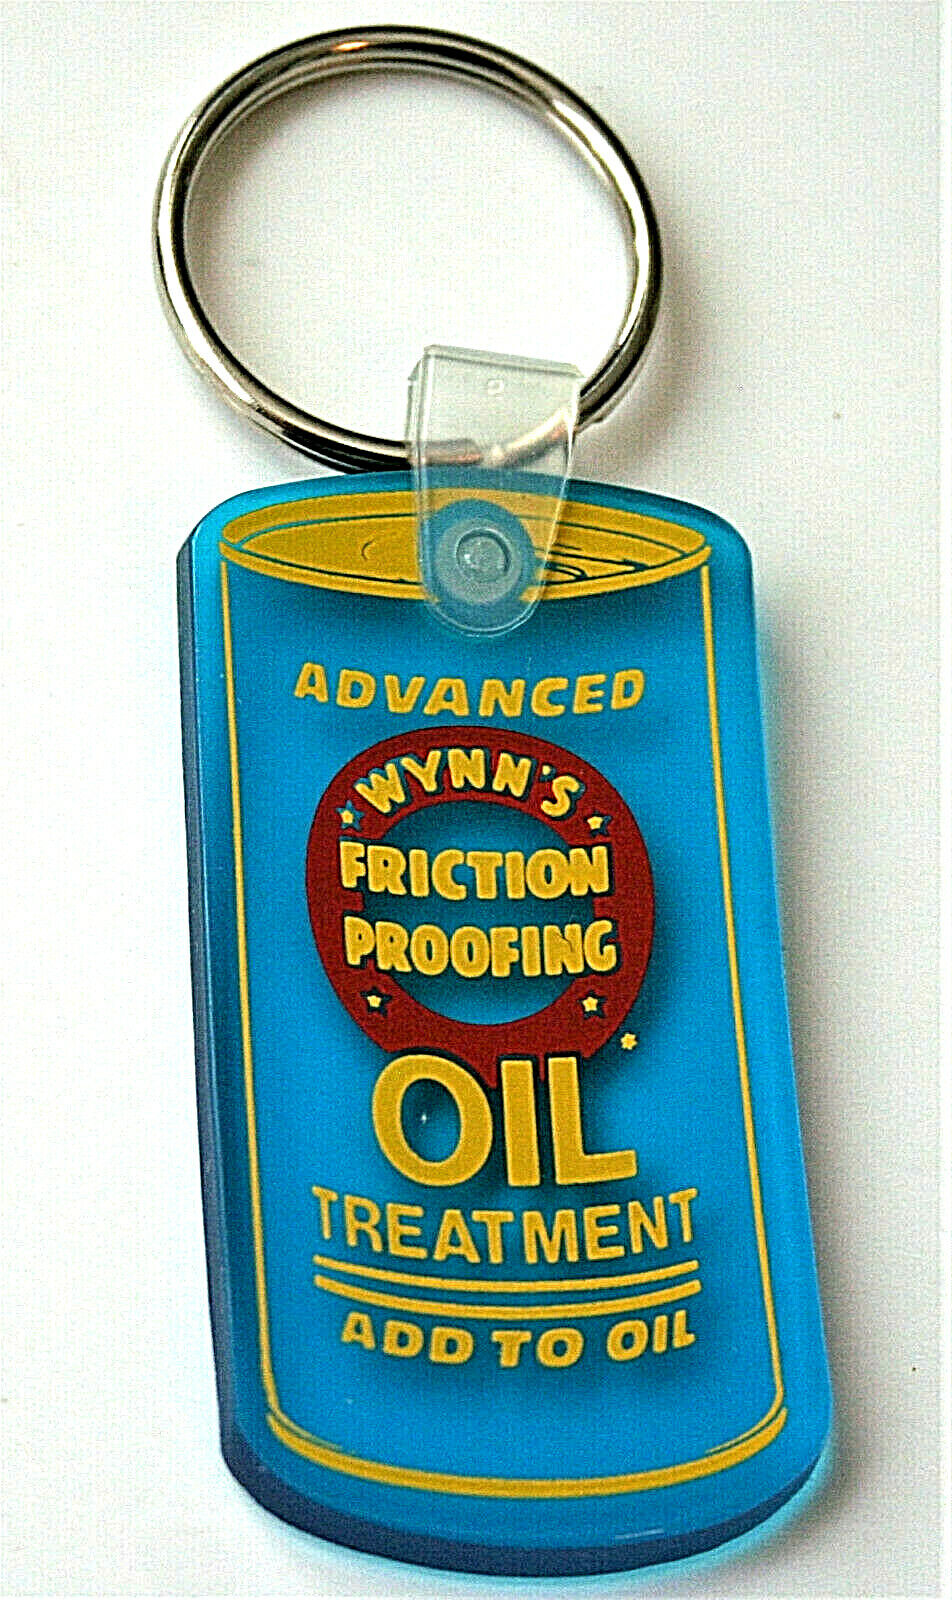 Wynn's Friction Proofing Oil Engine Treatment Can Promo Key Chain 1980s NOS New 